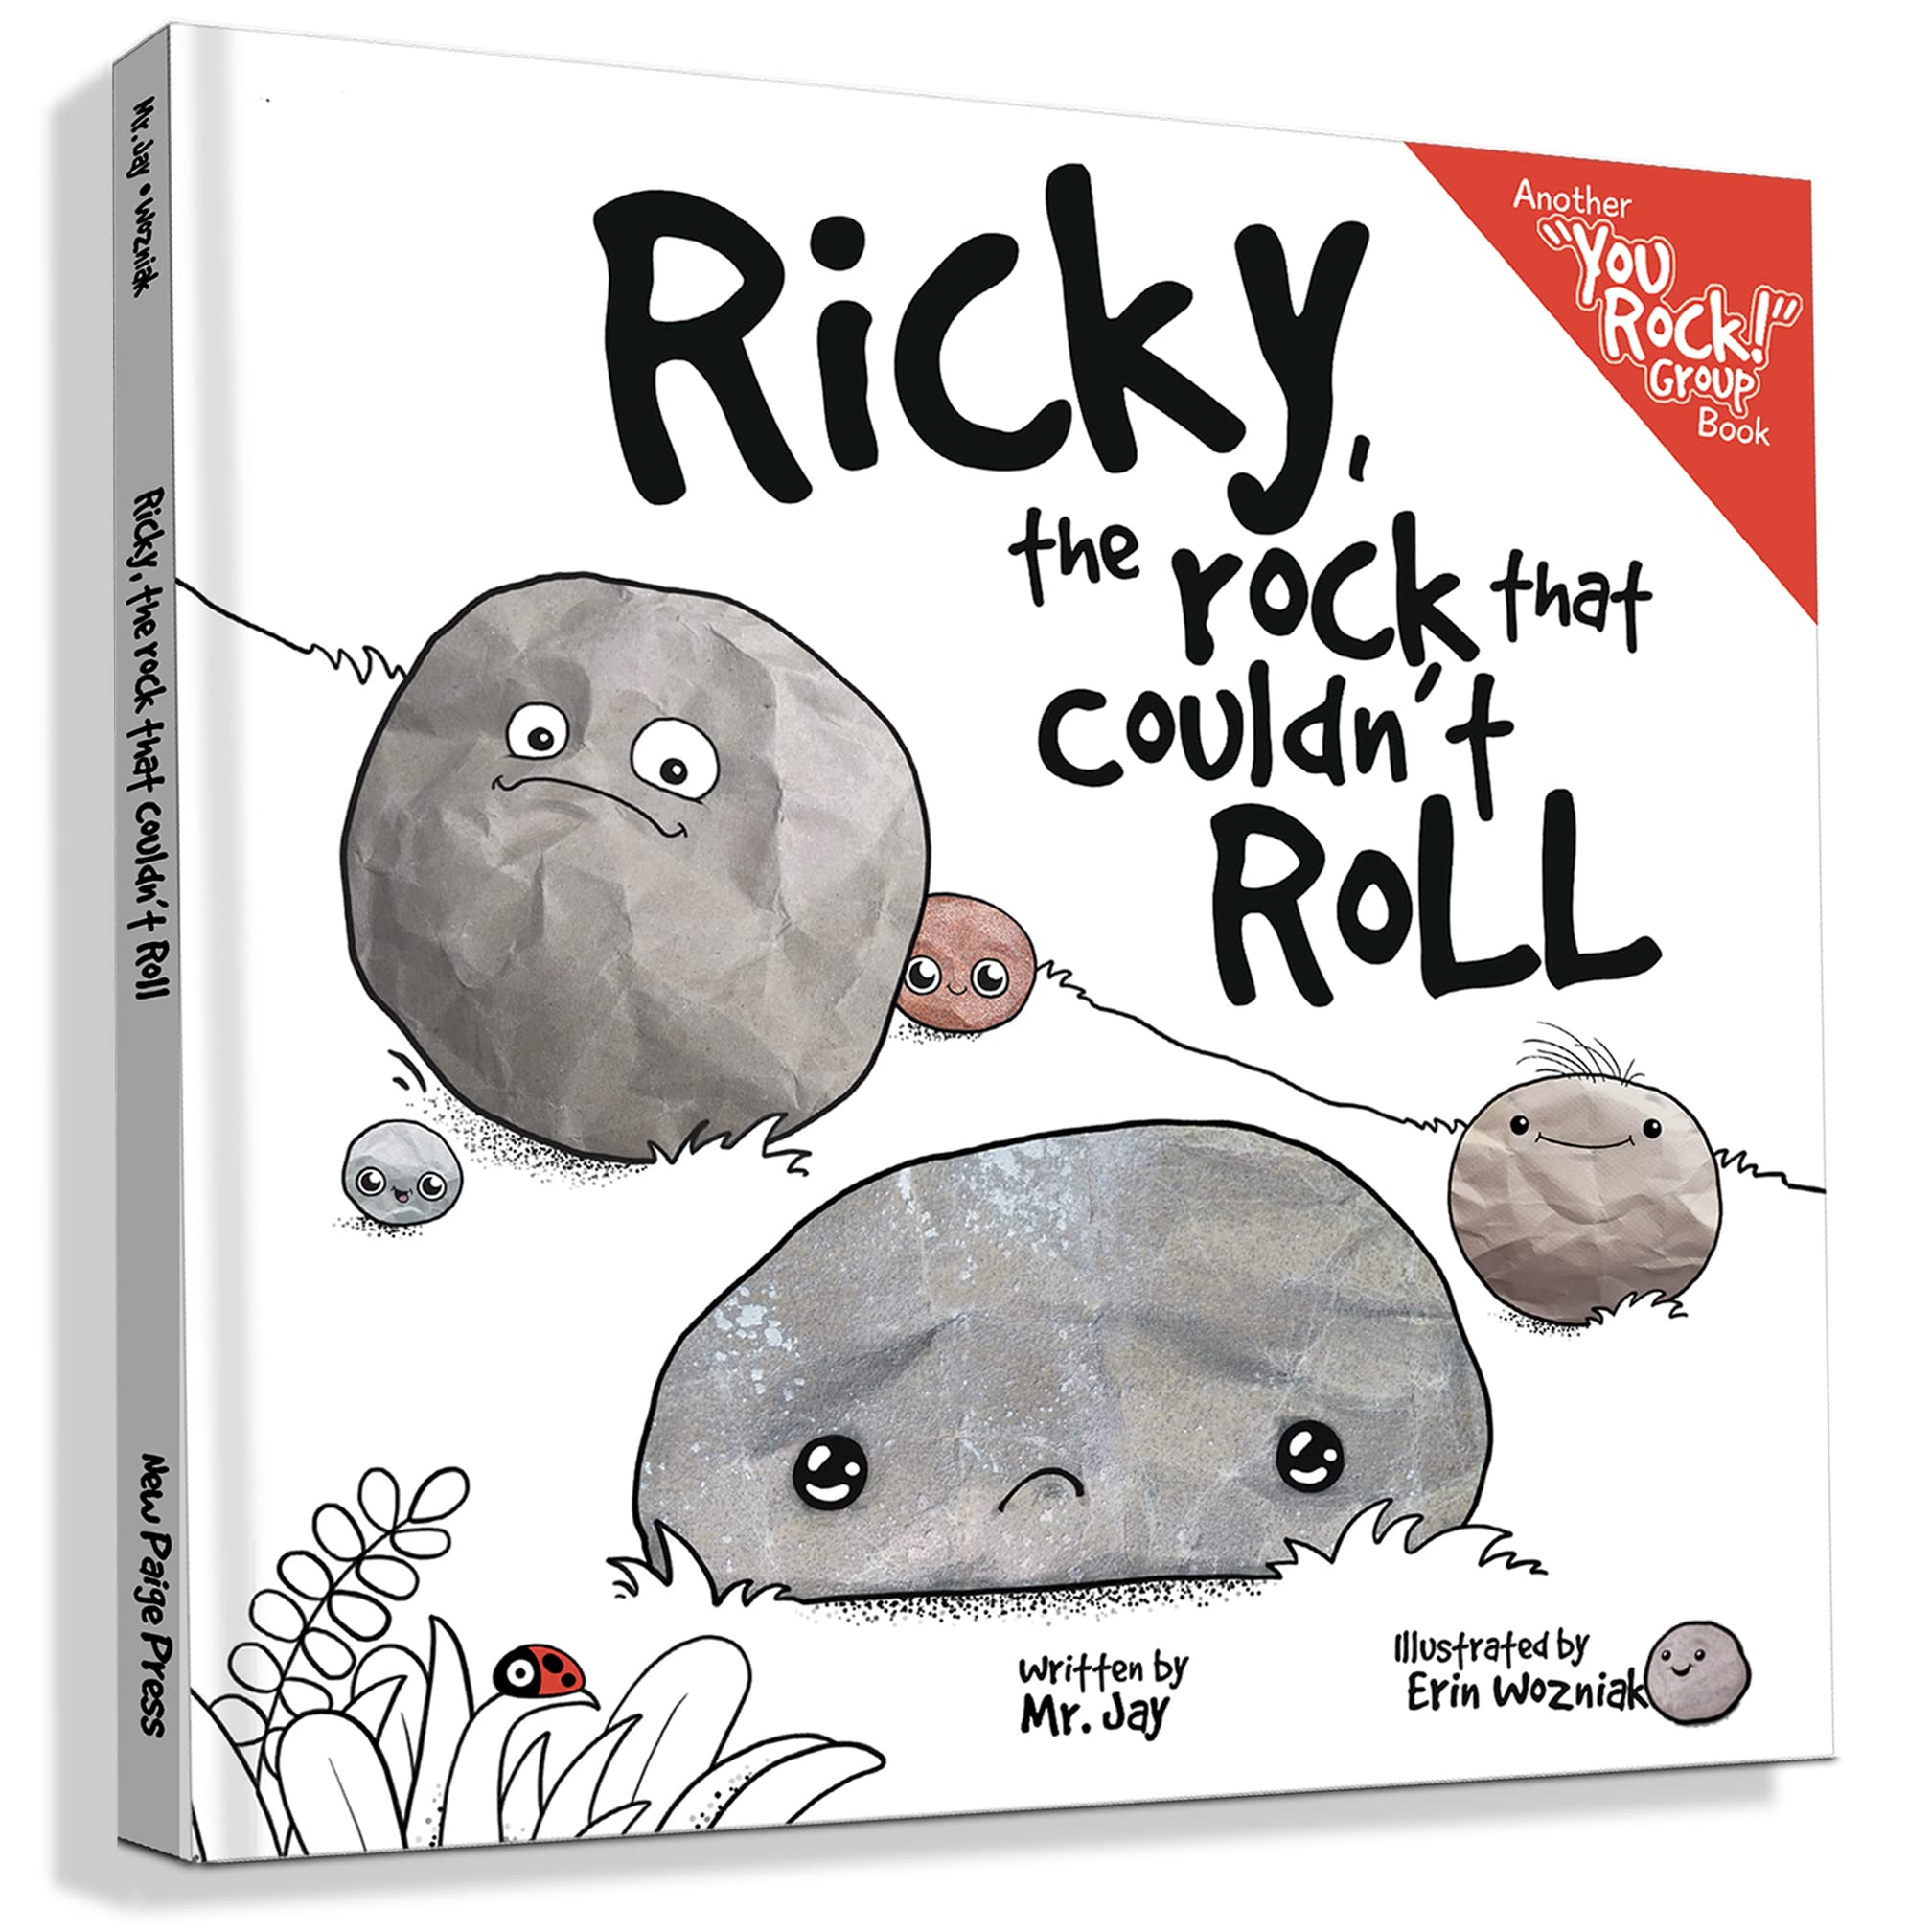 Ricky the Rock that Couldn't Roll book cover